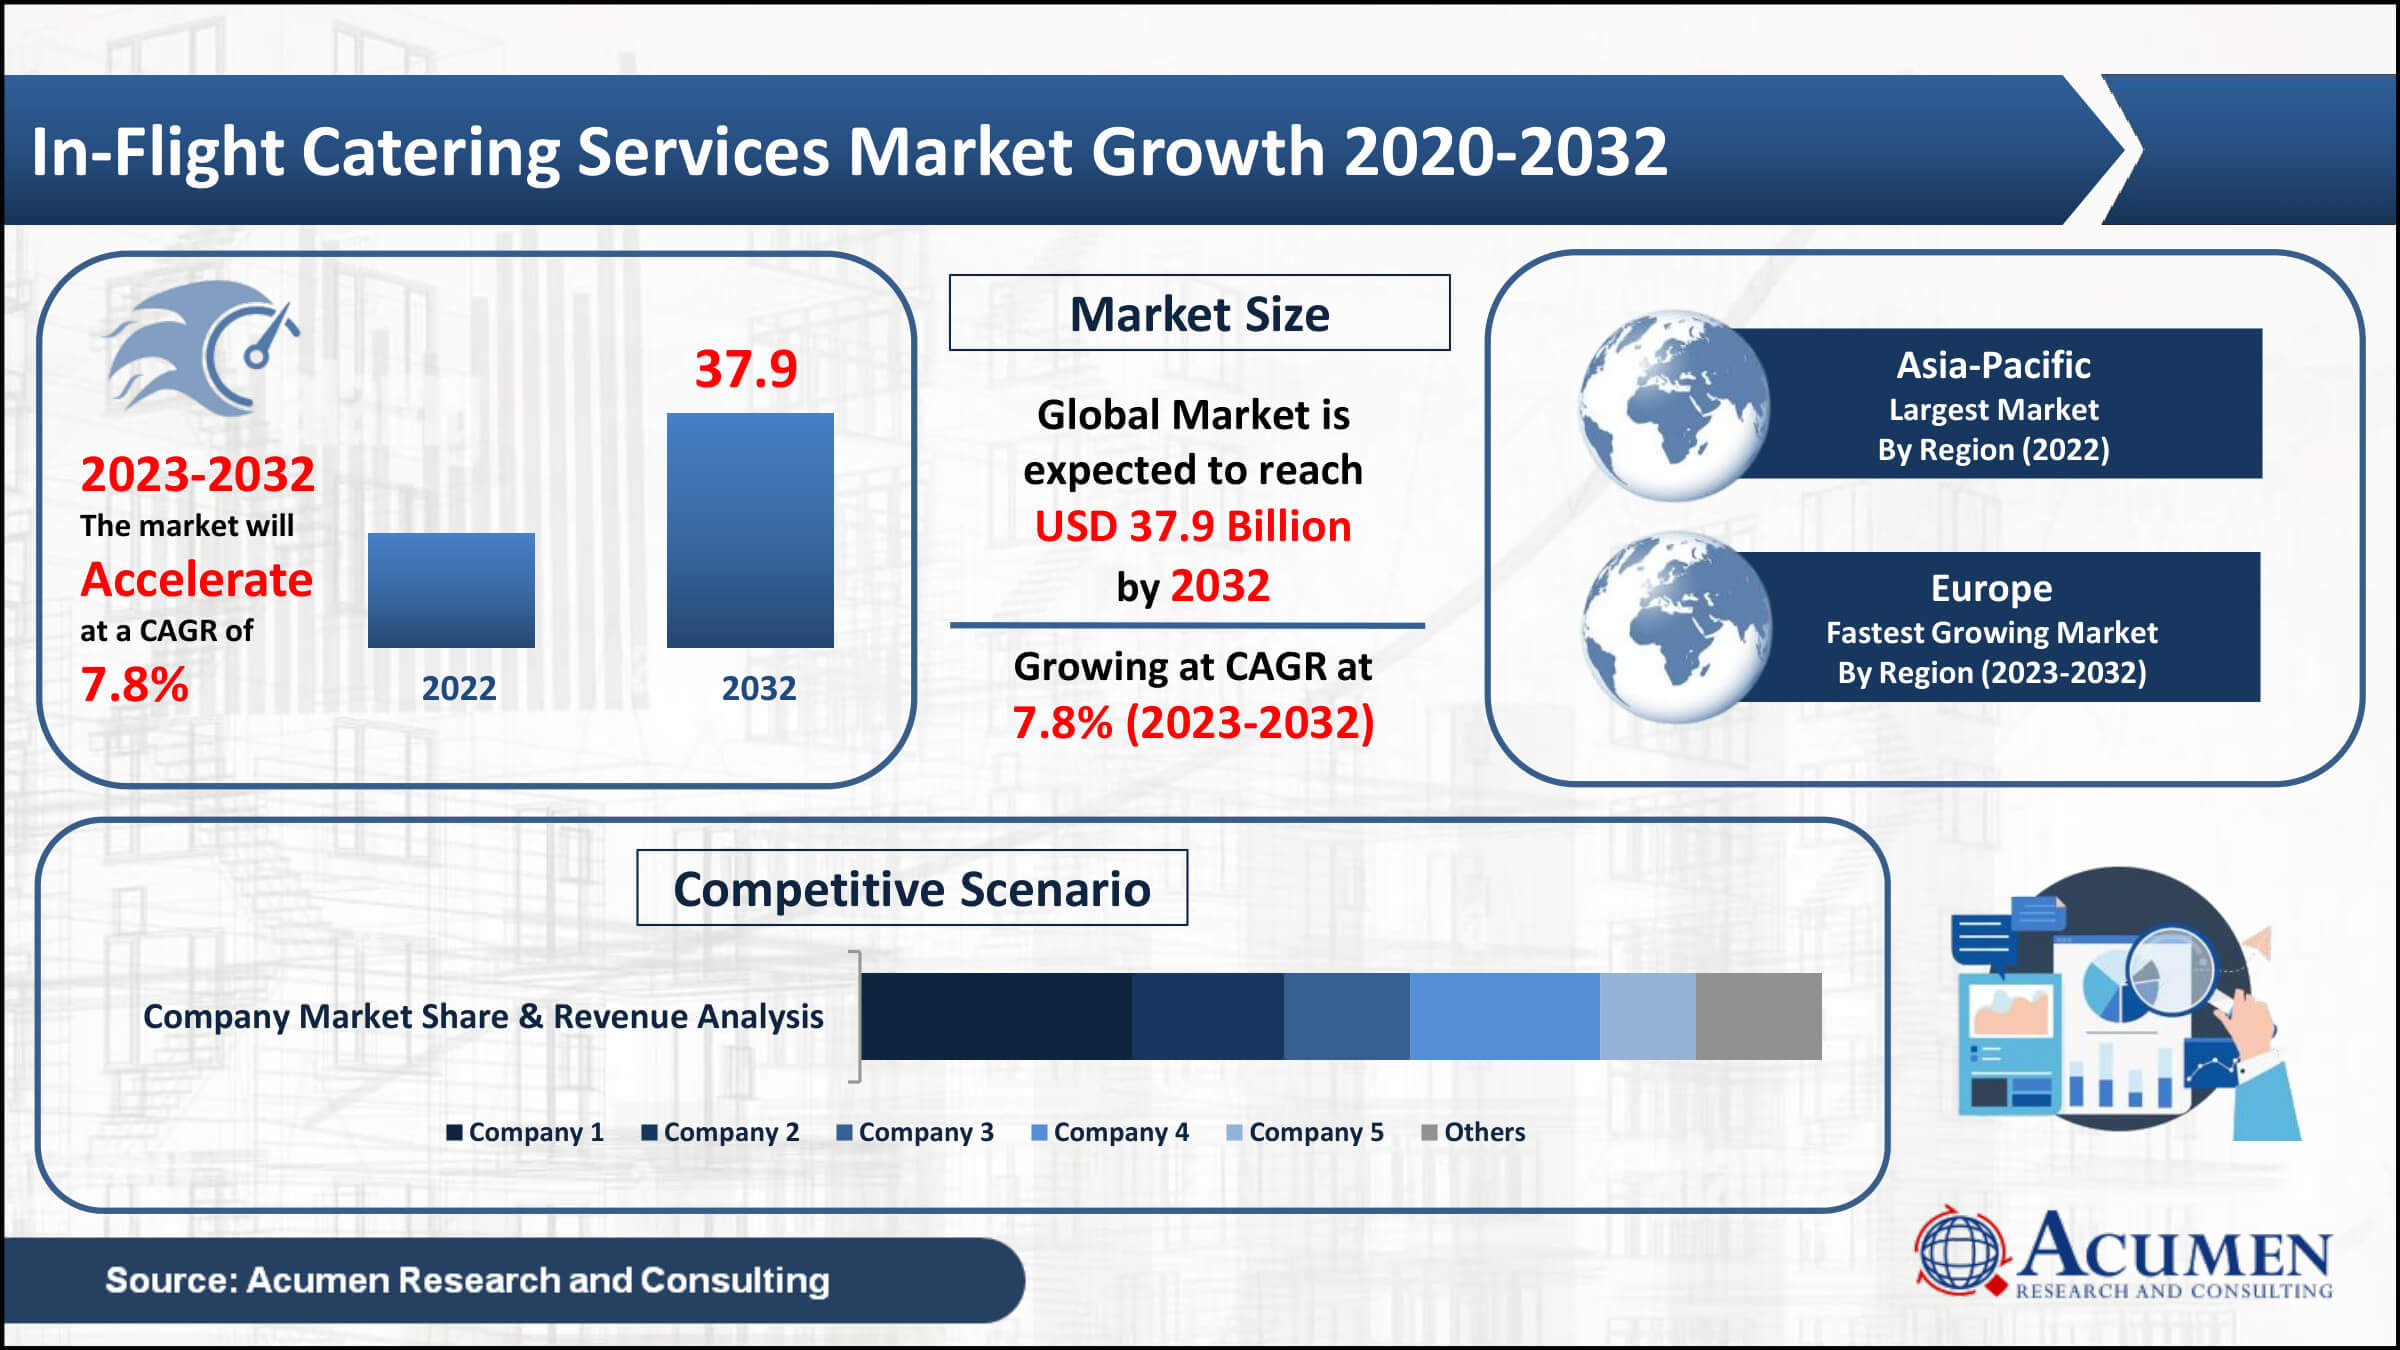 In-Flight Catering Services Market Trends